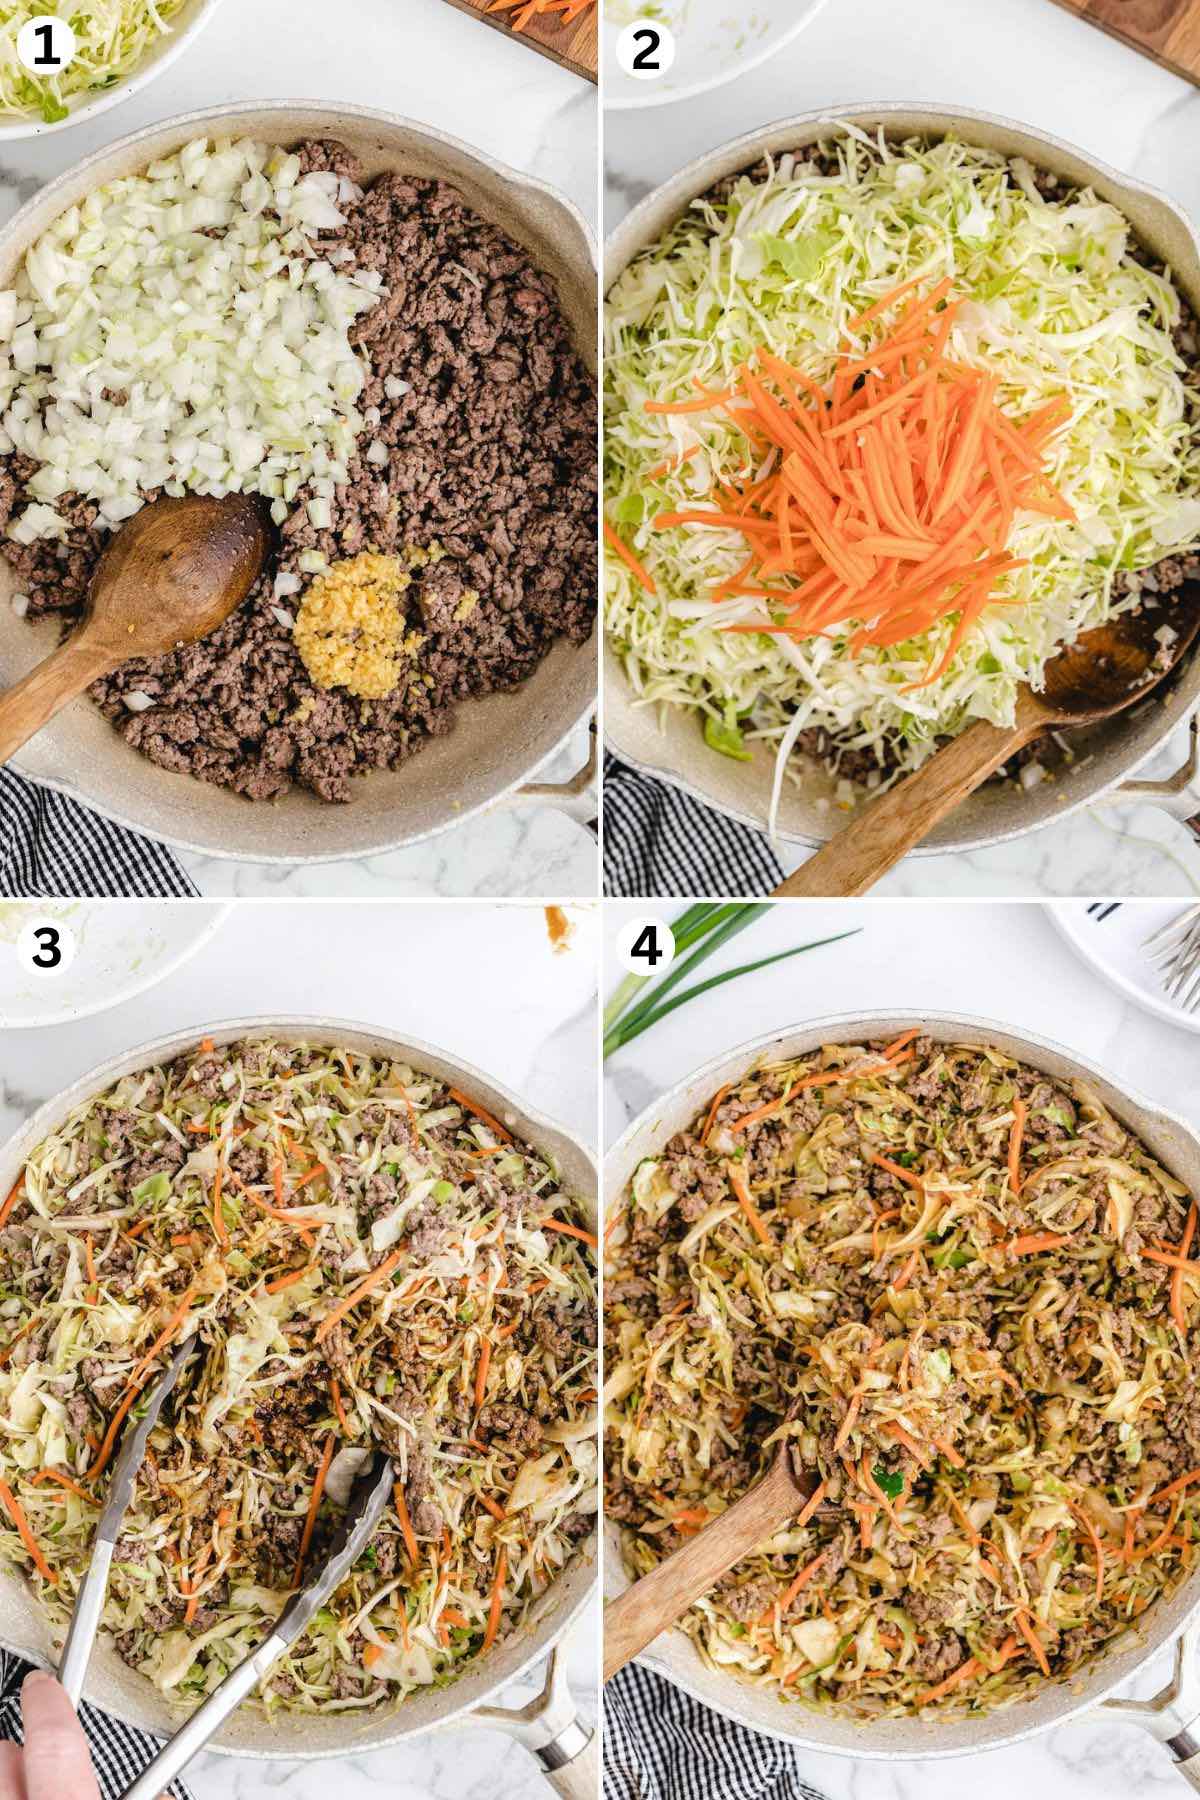 Cook ground beef, onions, and minced garlic until meat is browned. Add sesame oil, carrots, and cabbage. Add all the other ingredients and cook until cabbage and carrots are tender.